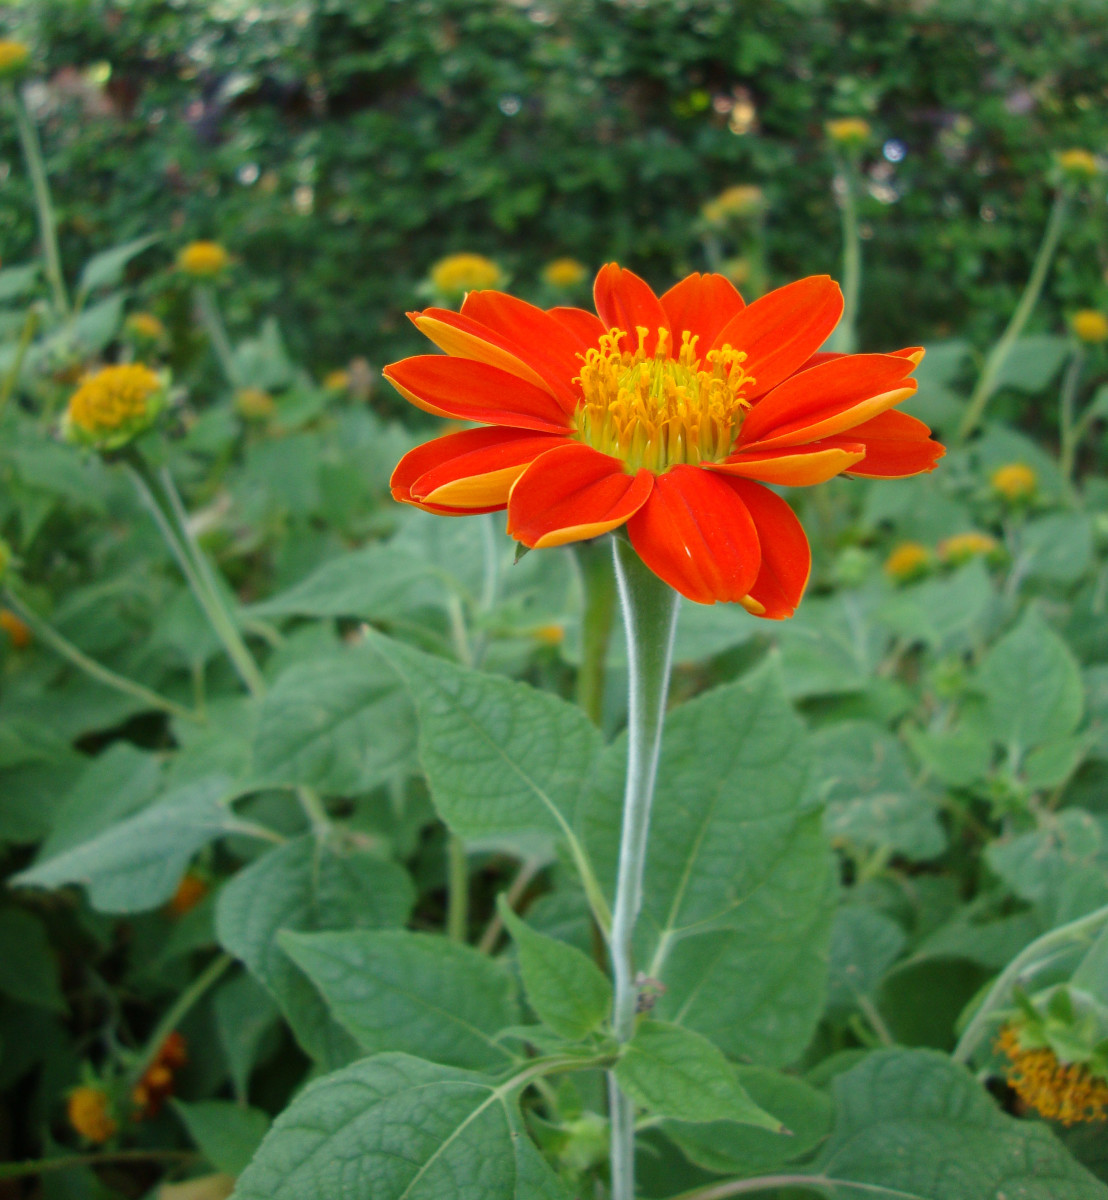 Mexican Sunflowers - Orange Red Ornamental Flowers For Gardens | HubPages